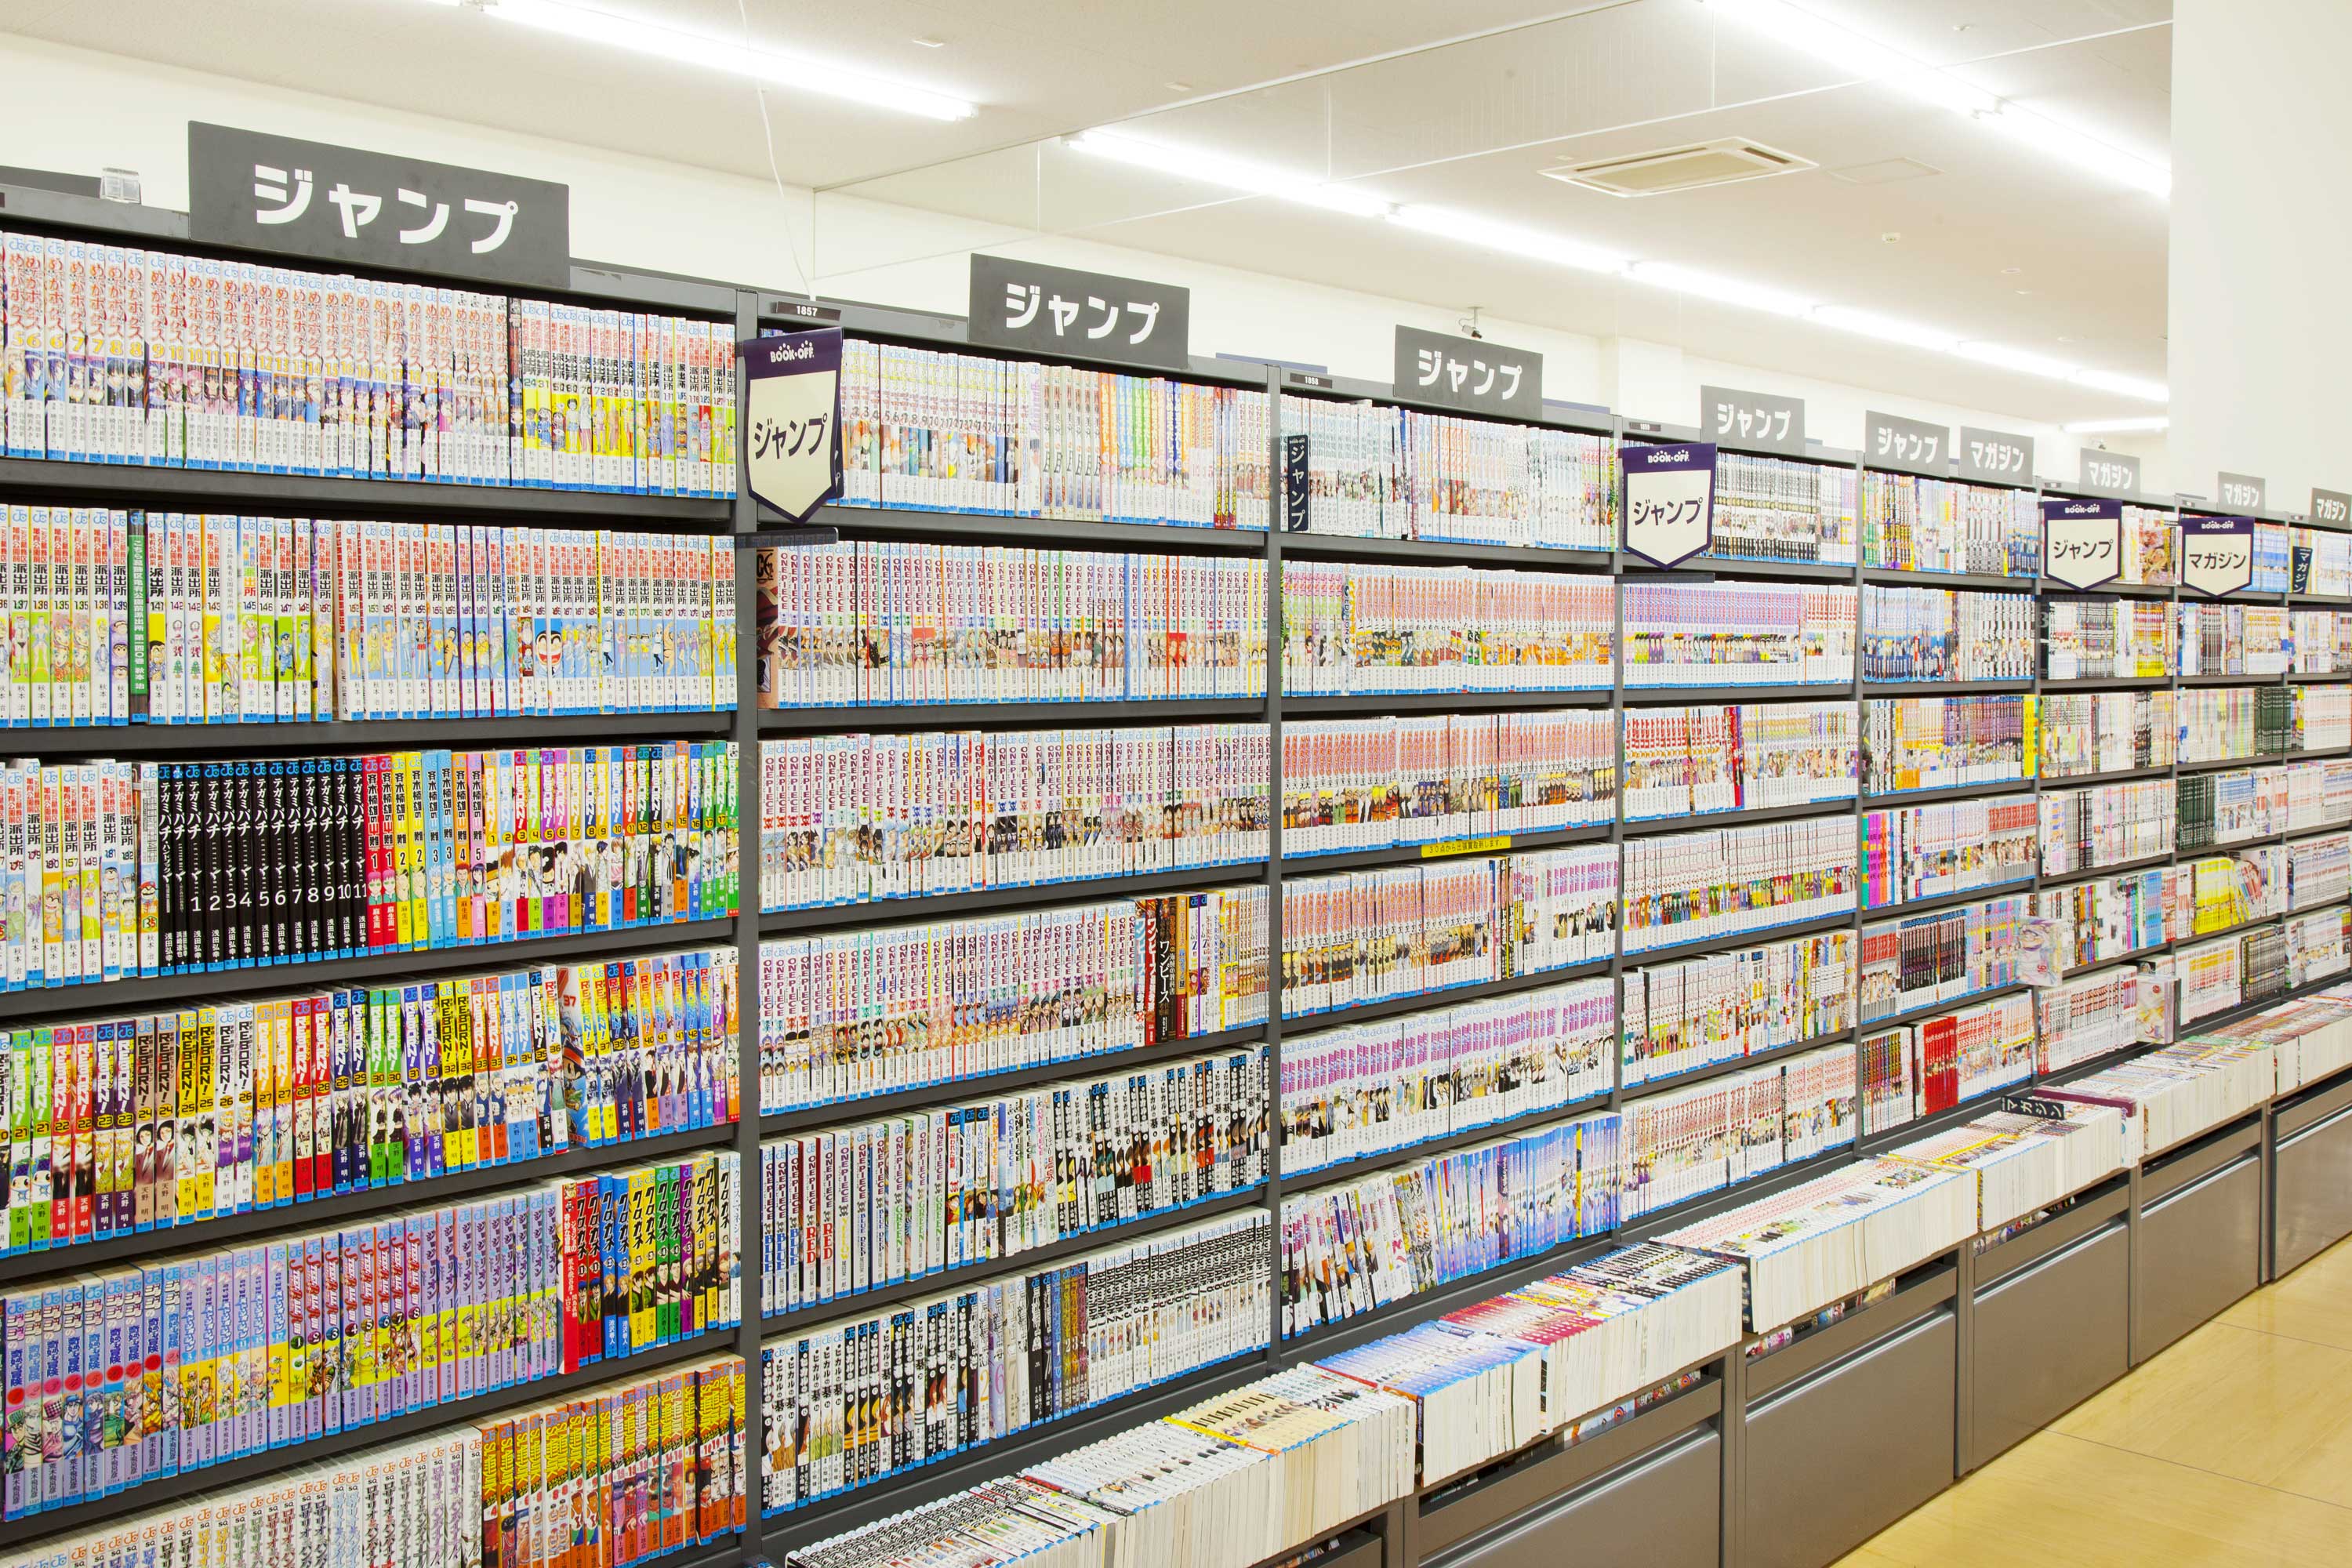 BOOK OFF LARGEST SECOND SHOP IN JAPAN 